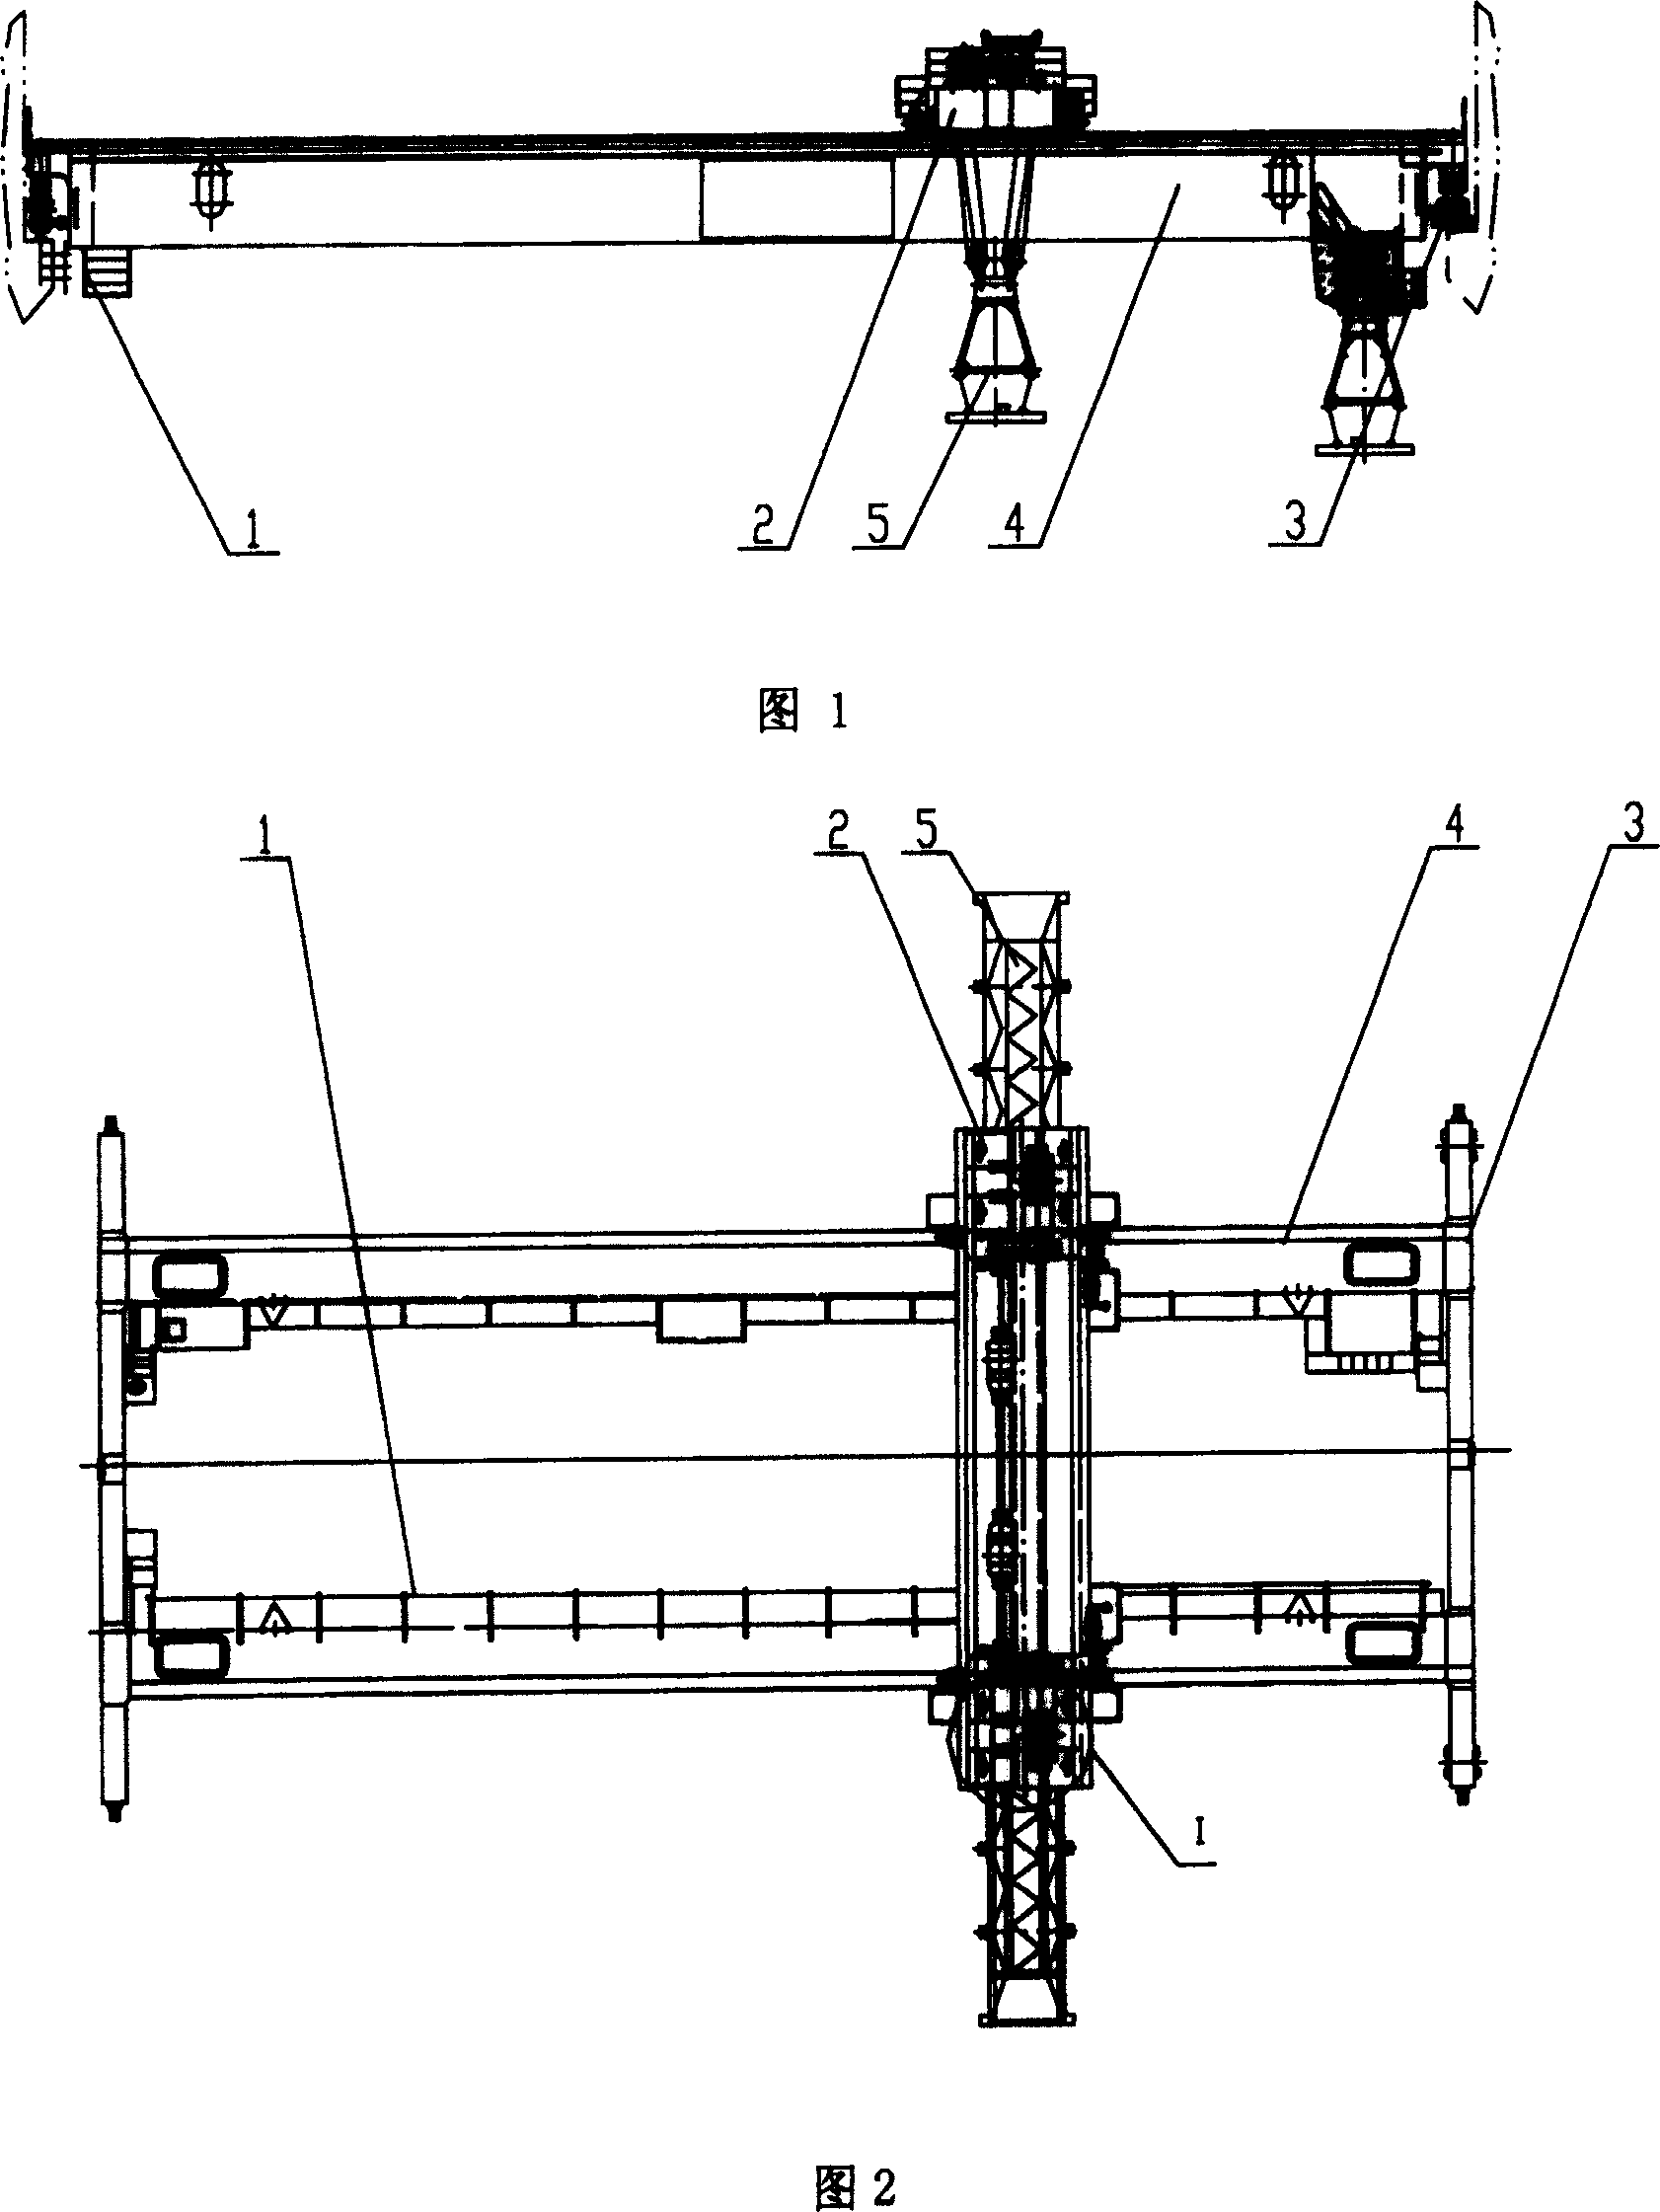 Method for preventing swinging of beam hanging and steel plate during starting and braking of electromagnetic beam hanging crane